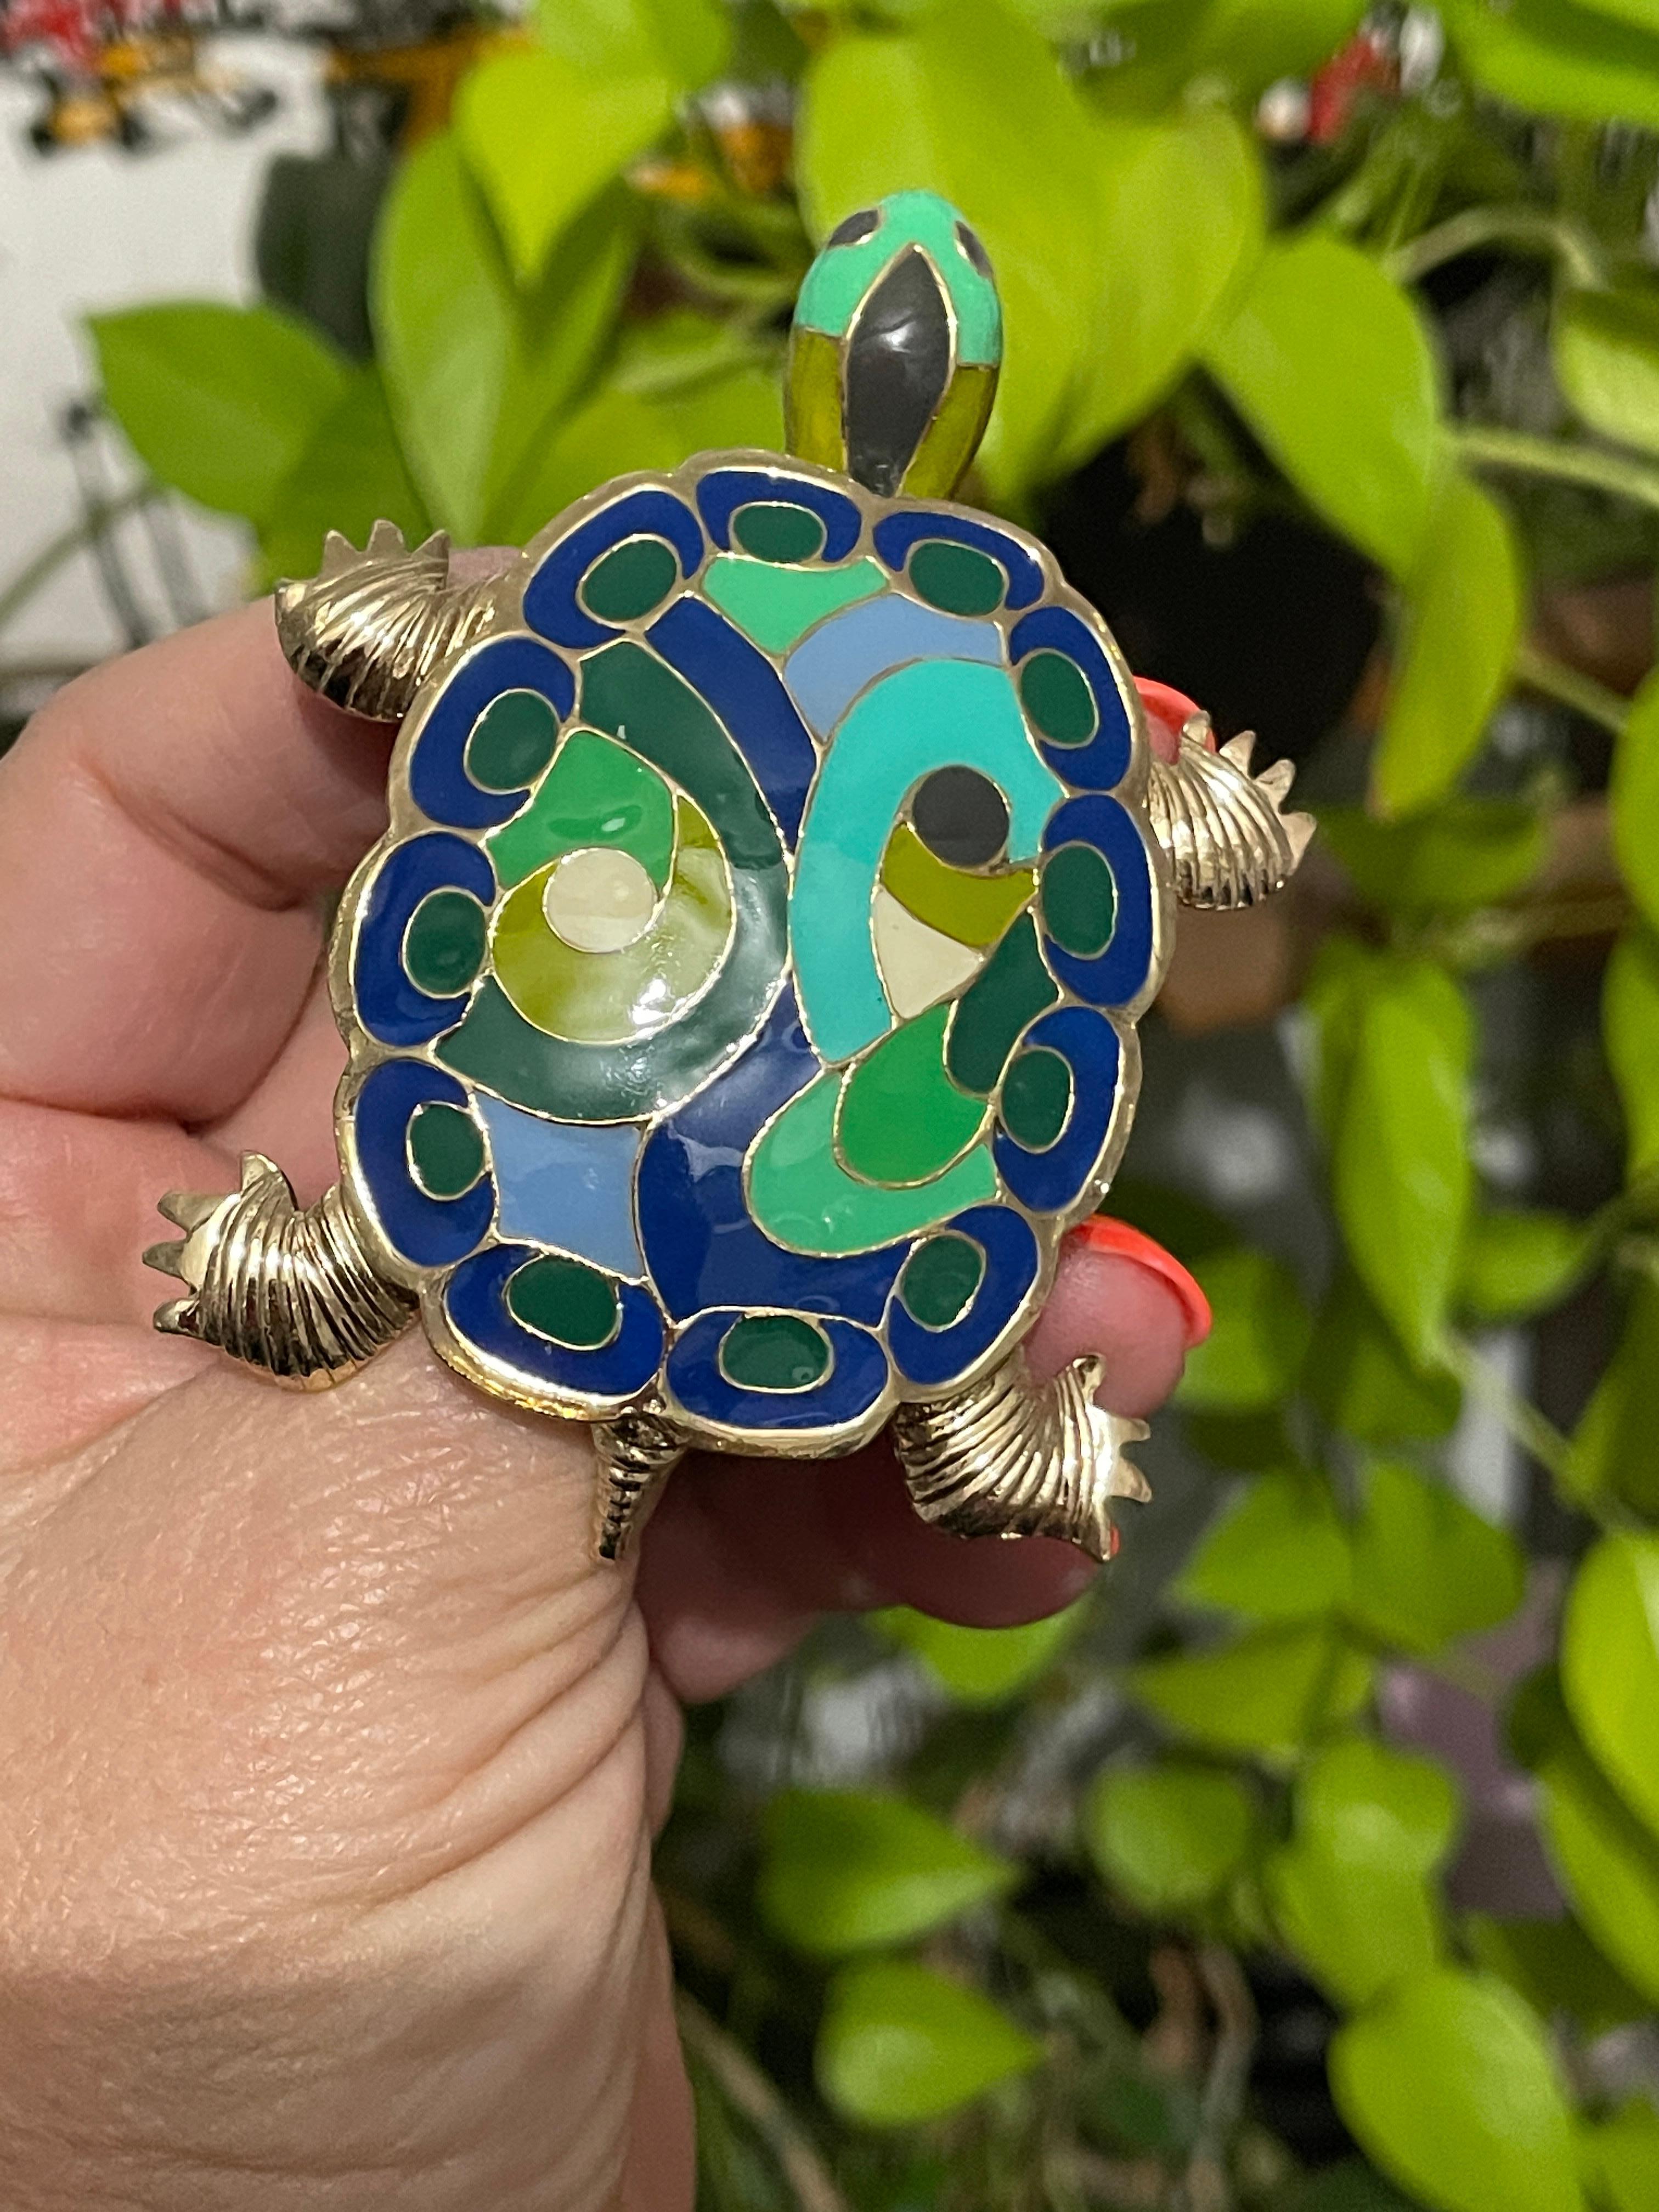  Eisenberg Enameled Turtle Brooch / Pendant 1980s In New Condition For Sale In Wallkill, NY